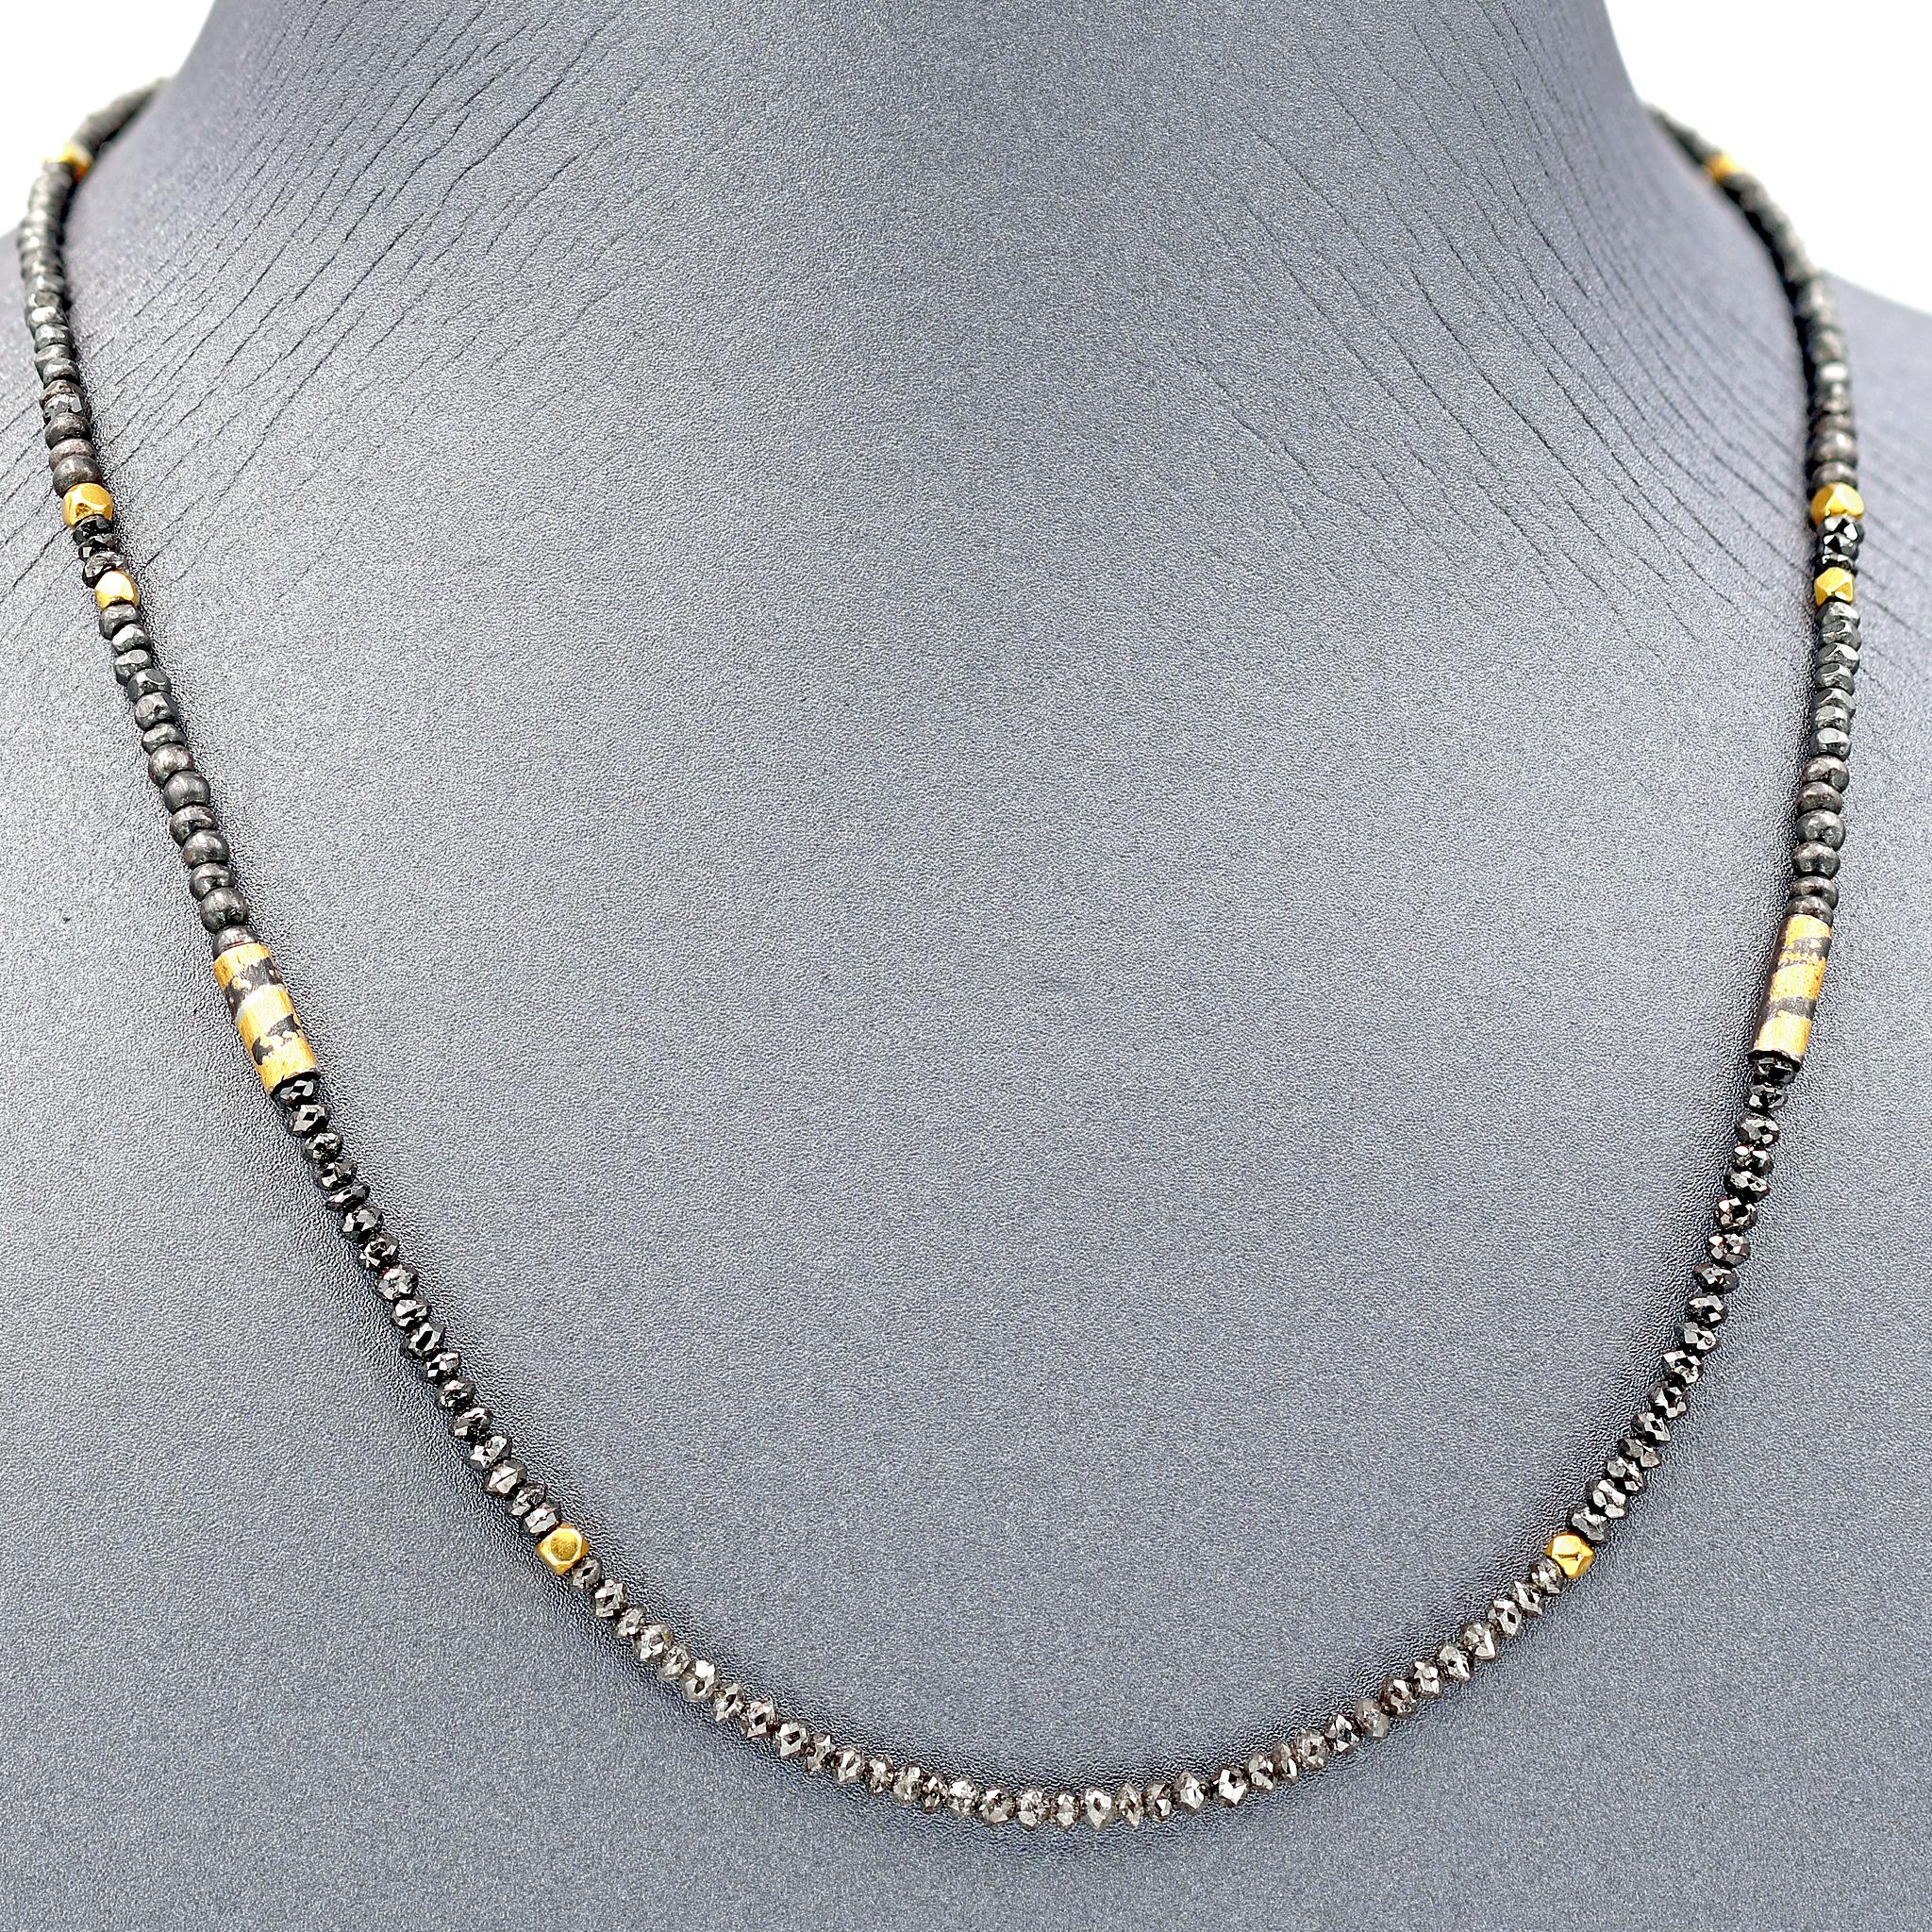 One of a Kind Dazzle Necklace hand-fabricated by renowned jewelry maker Atelier Zobel (Peter Schmid) featuring 9.02 total carats of assorted salt and pepper diamonds and faceted black diamonds accented with 22k gold and Burmese 24k gold and finished